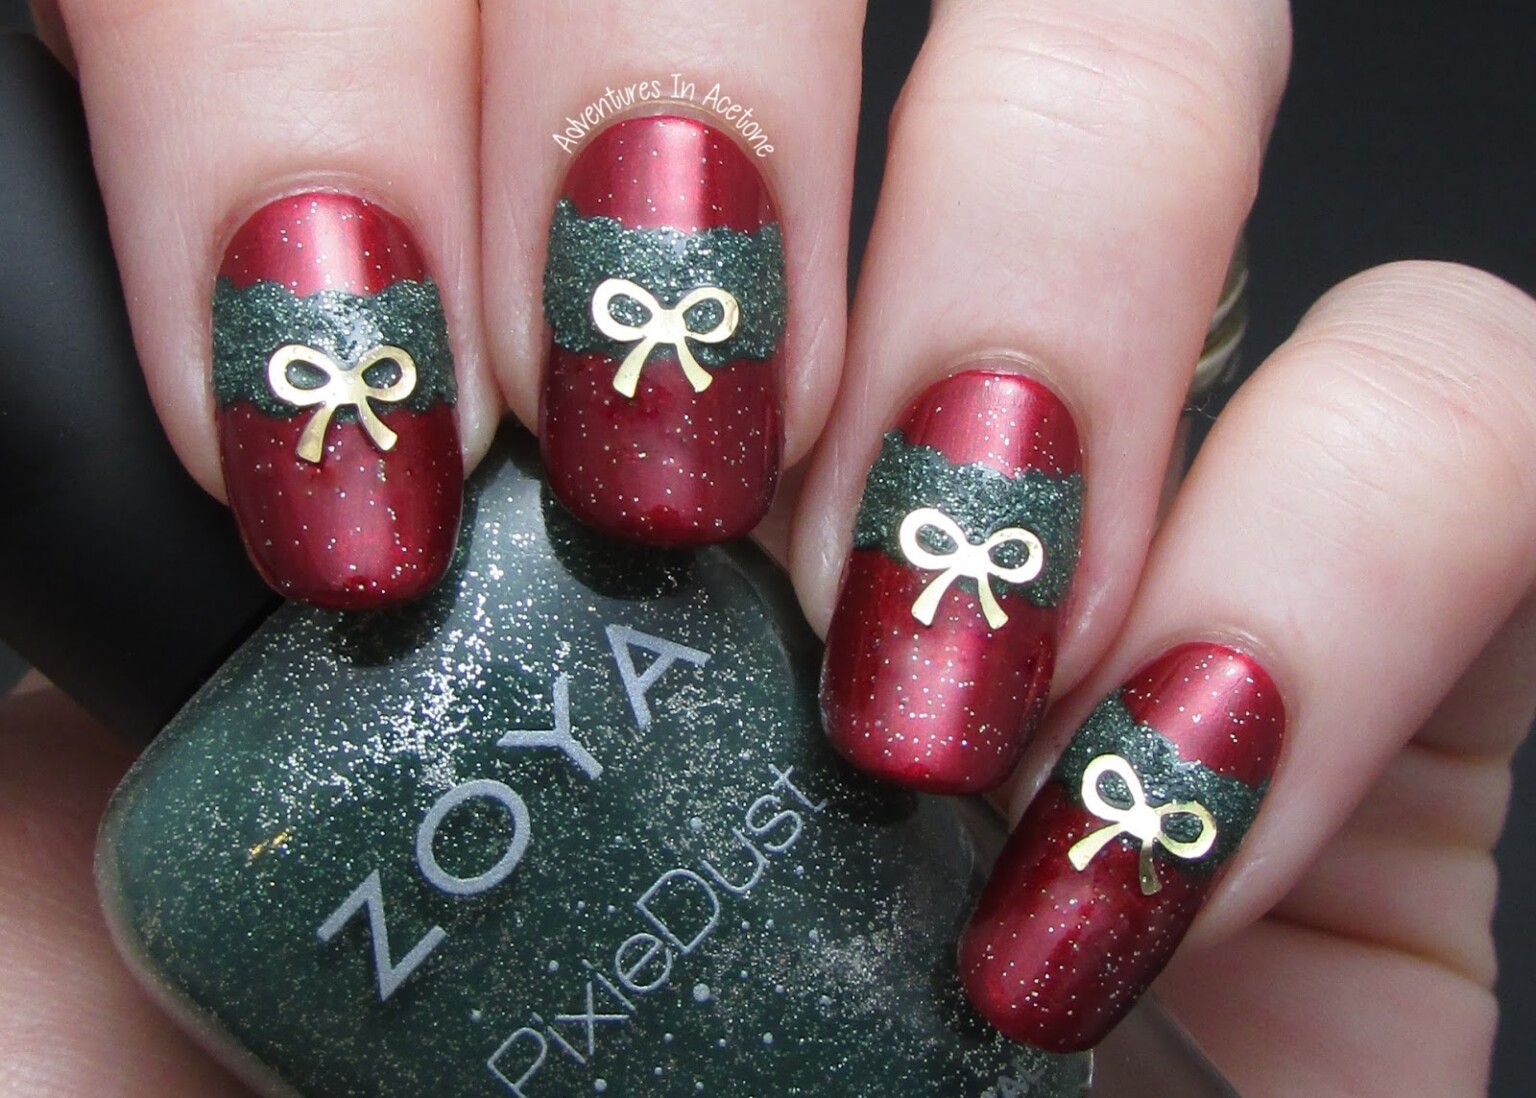 3. Holiday Glitter Gradient Nails - wide 4